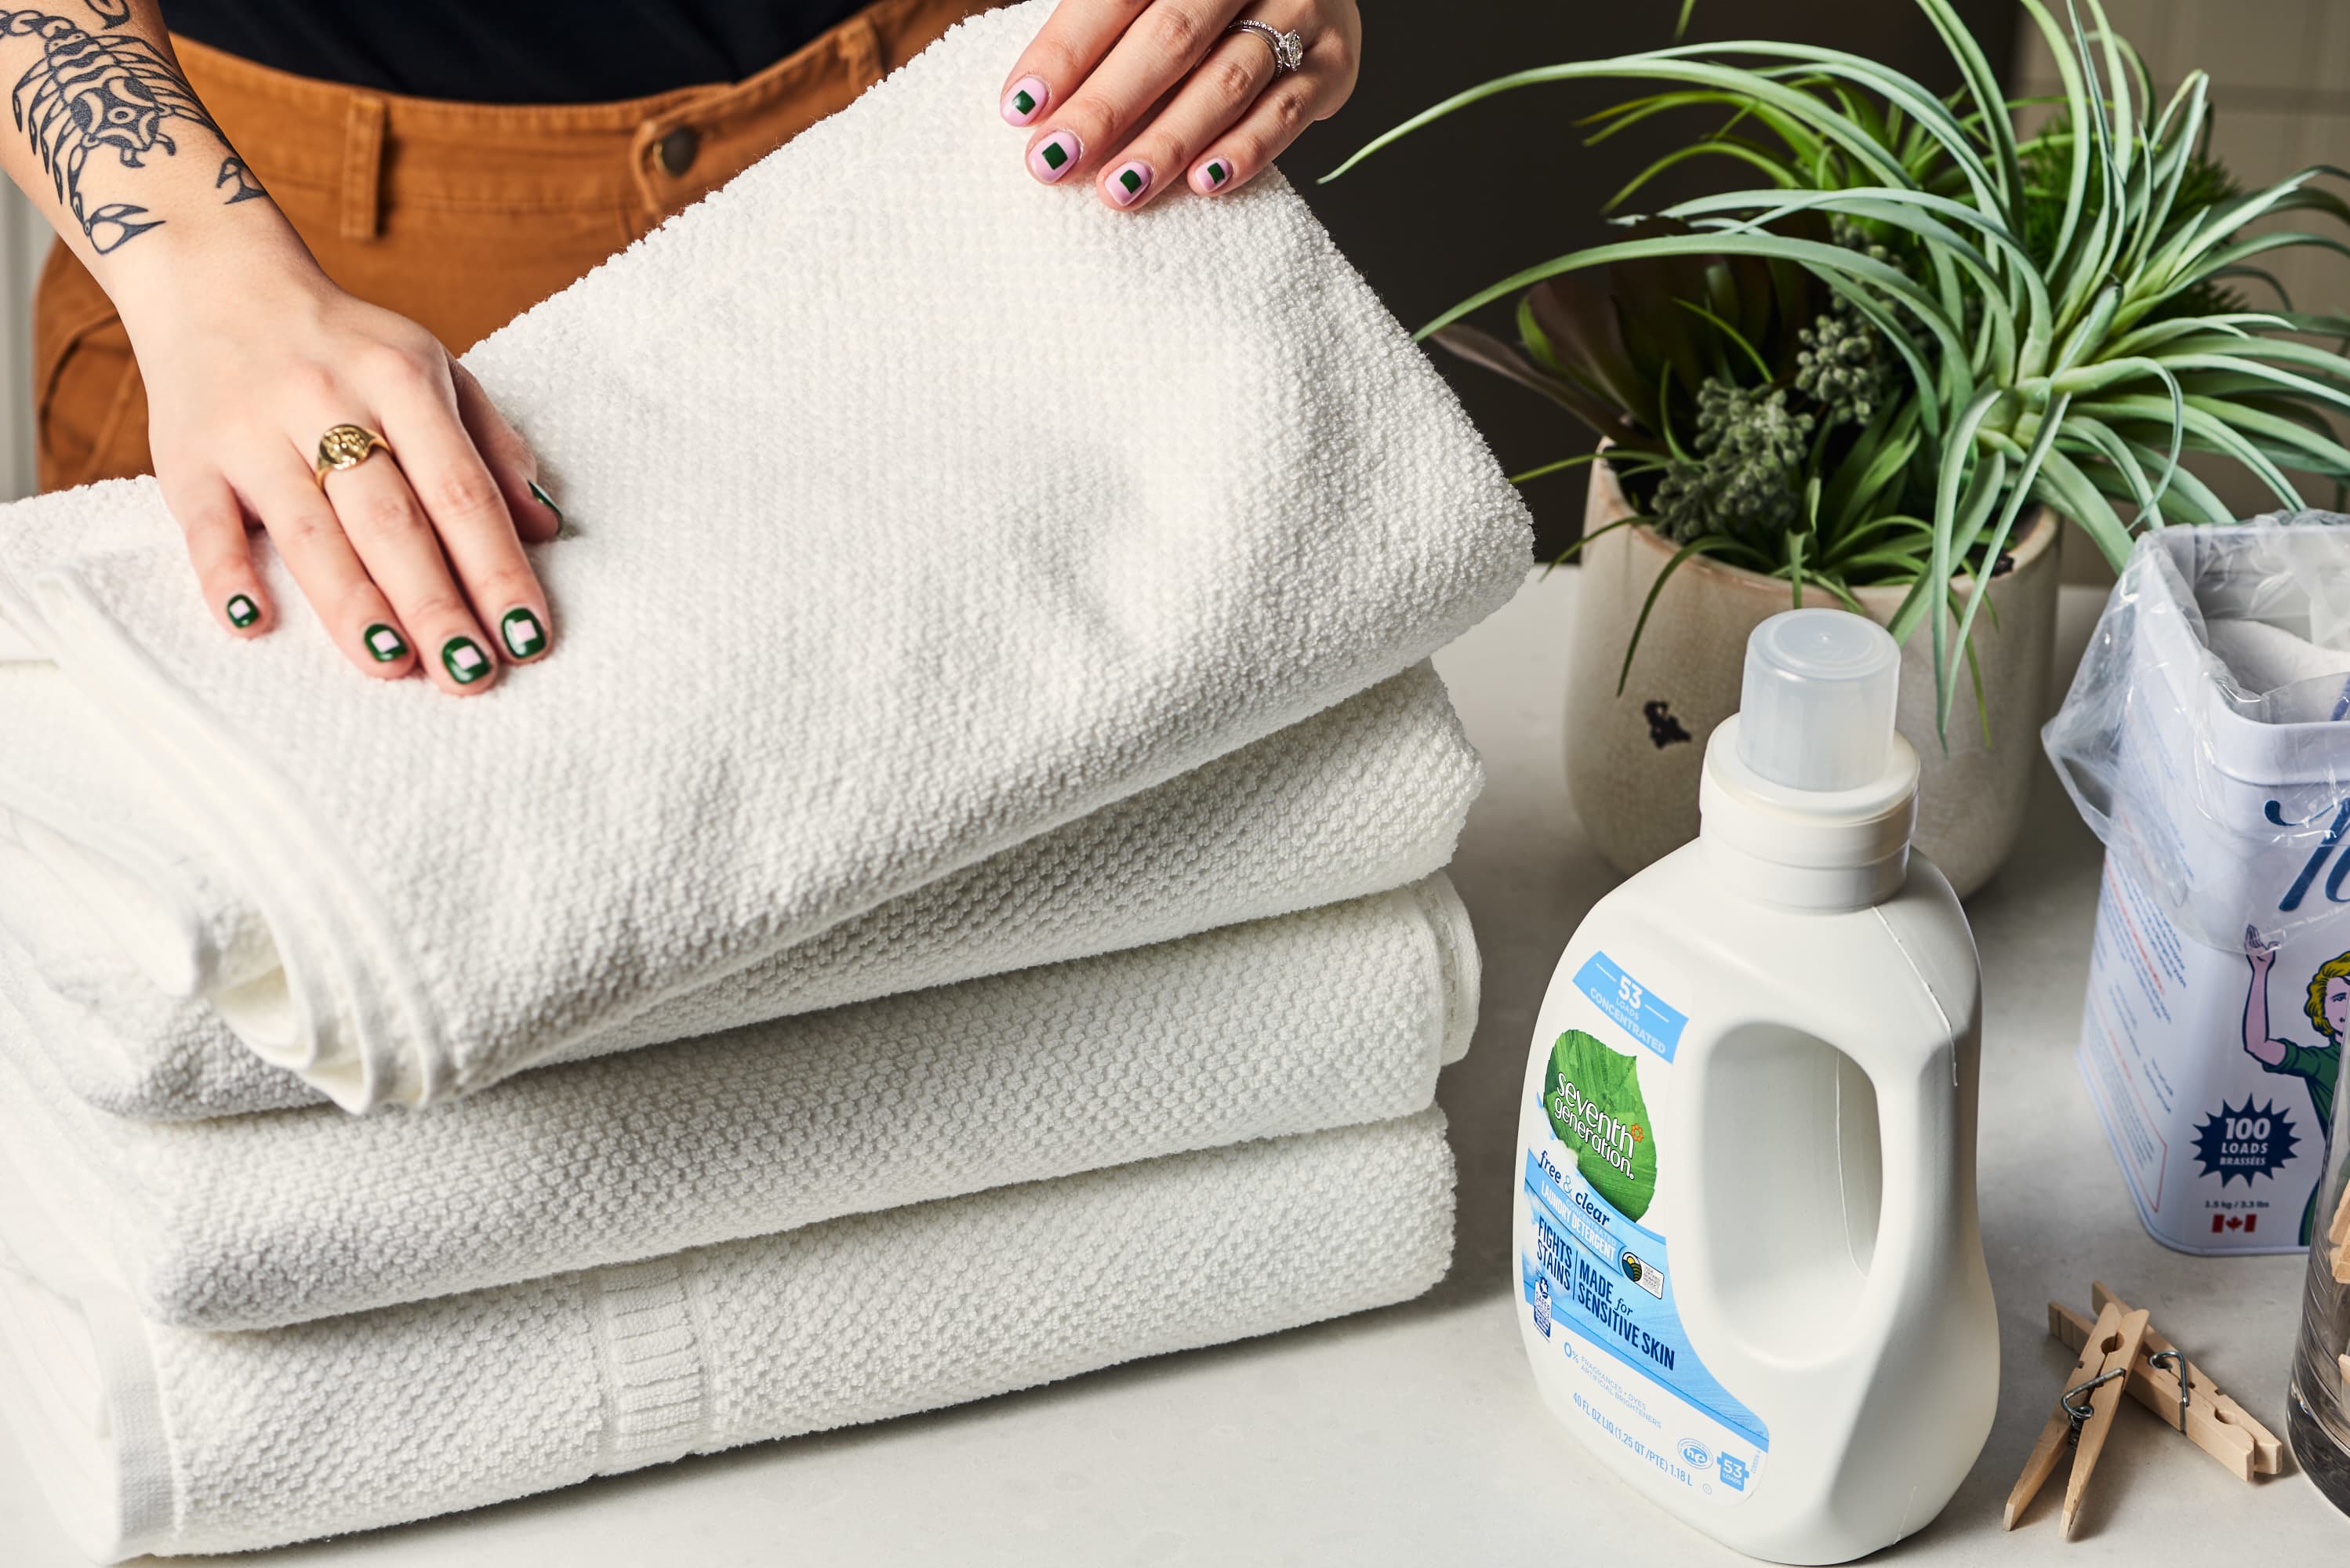 Laundry hacks you can actually buy to save water, quarters, and sanity